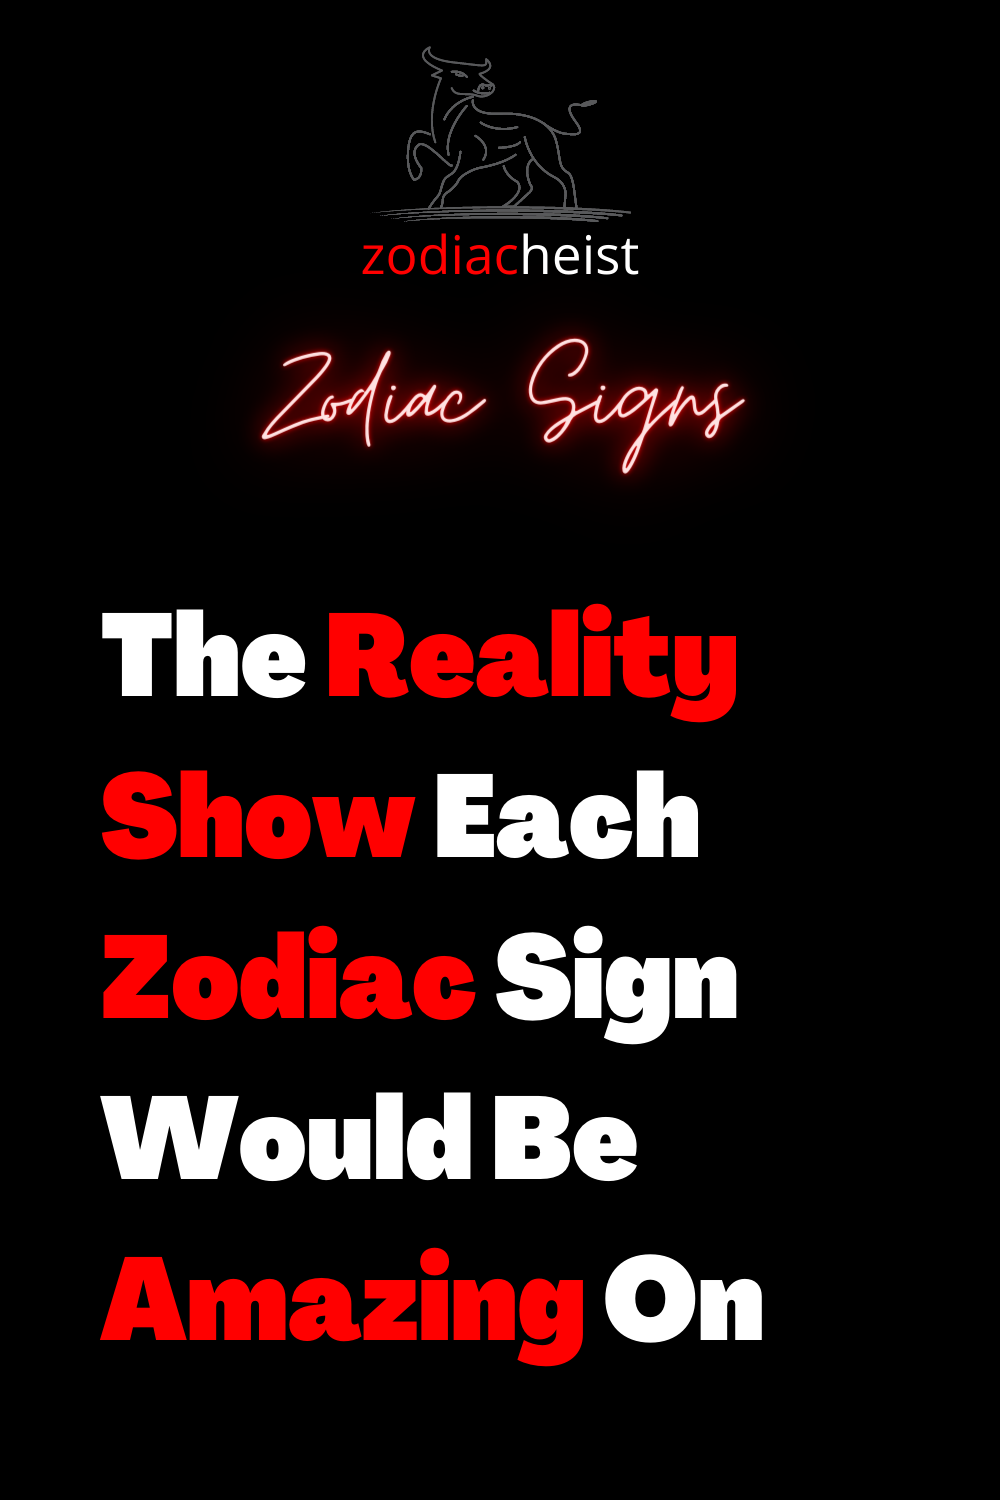 The Reality Show Each Zodiac Sign Would Be Amazing On